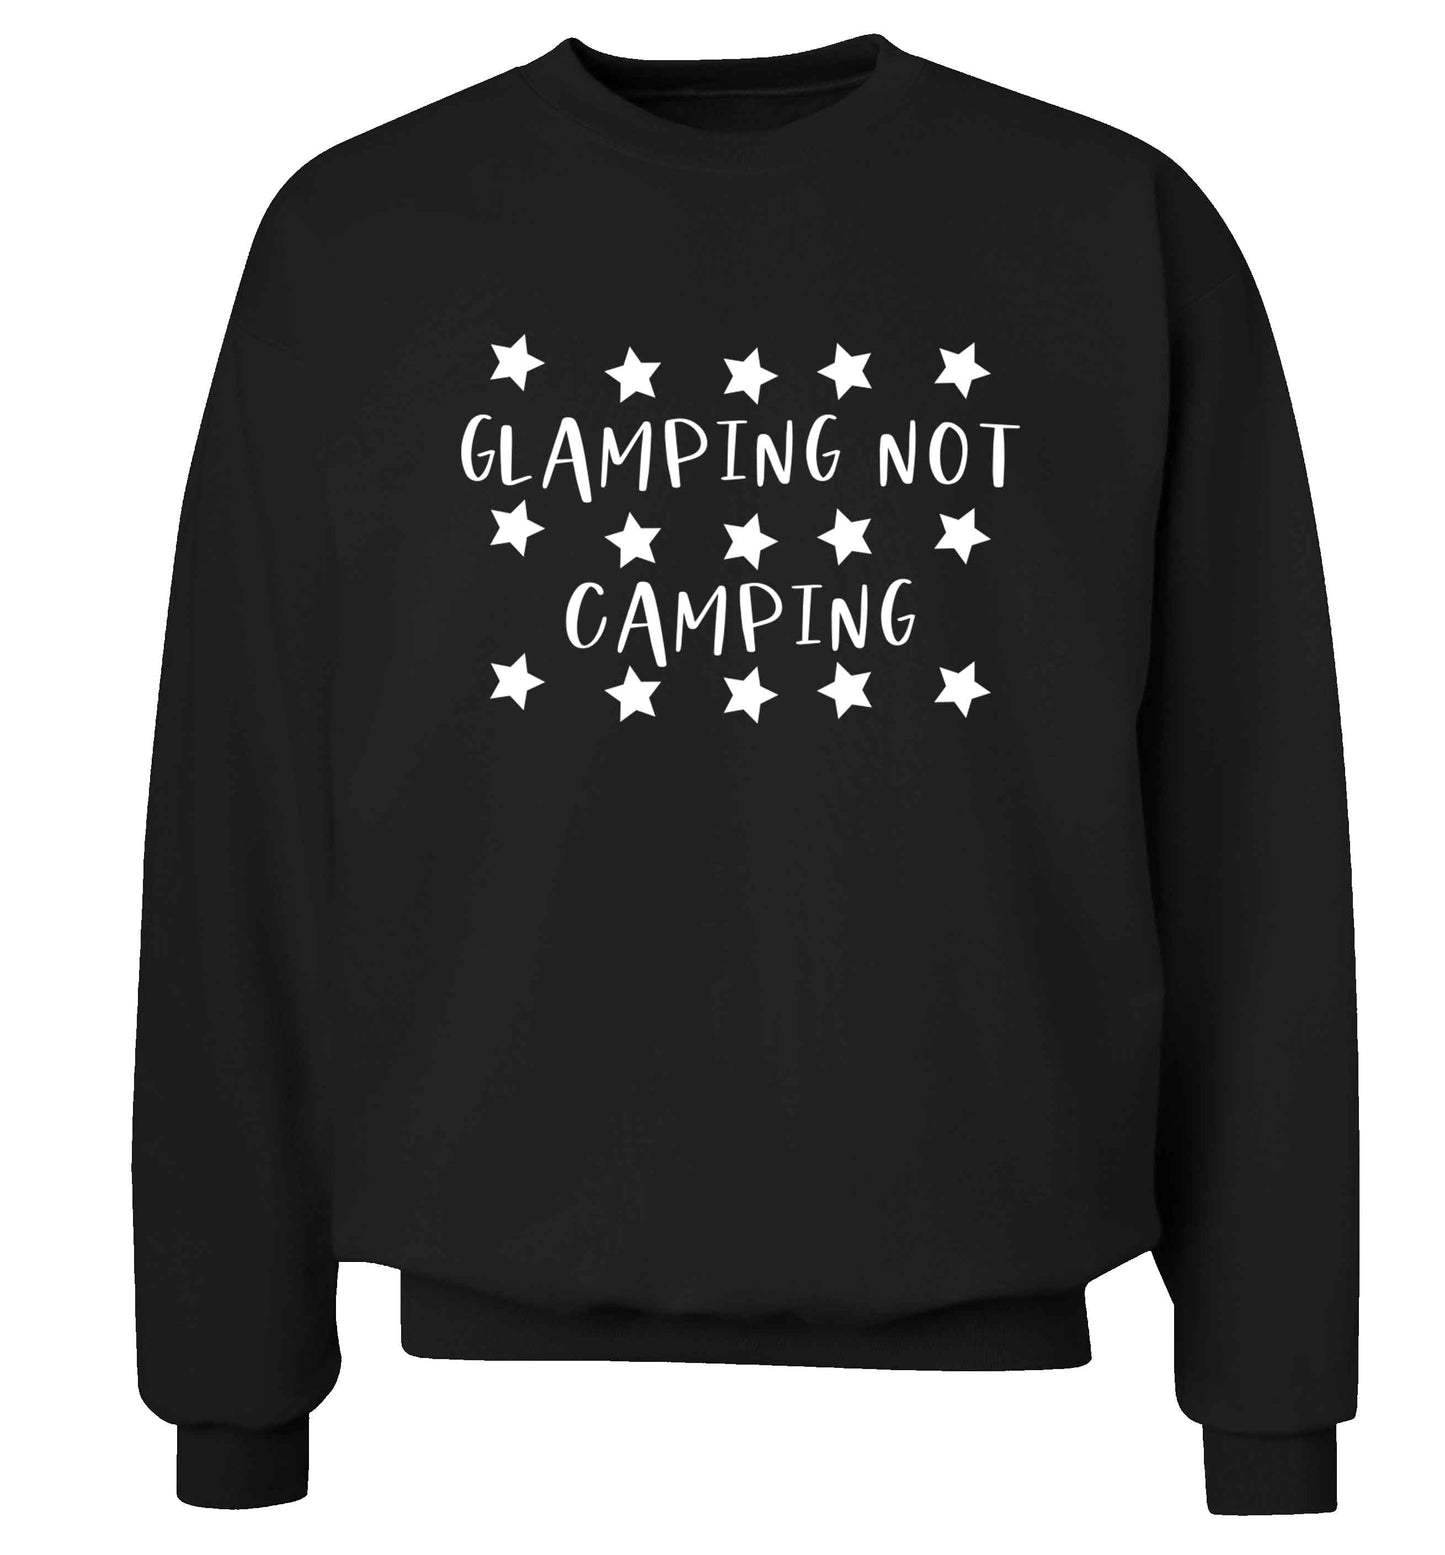 Glamping not camping Adult's unisex black Sweater 2XL